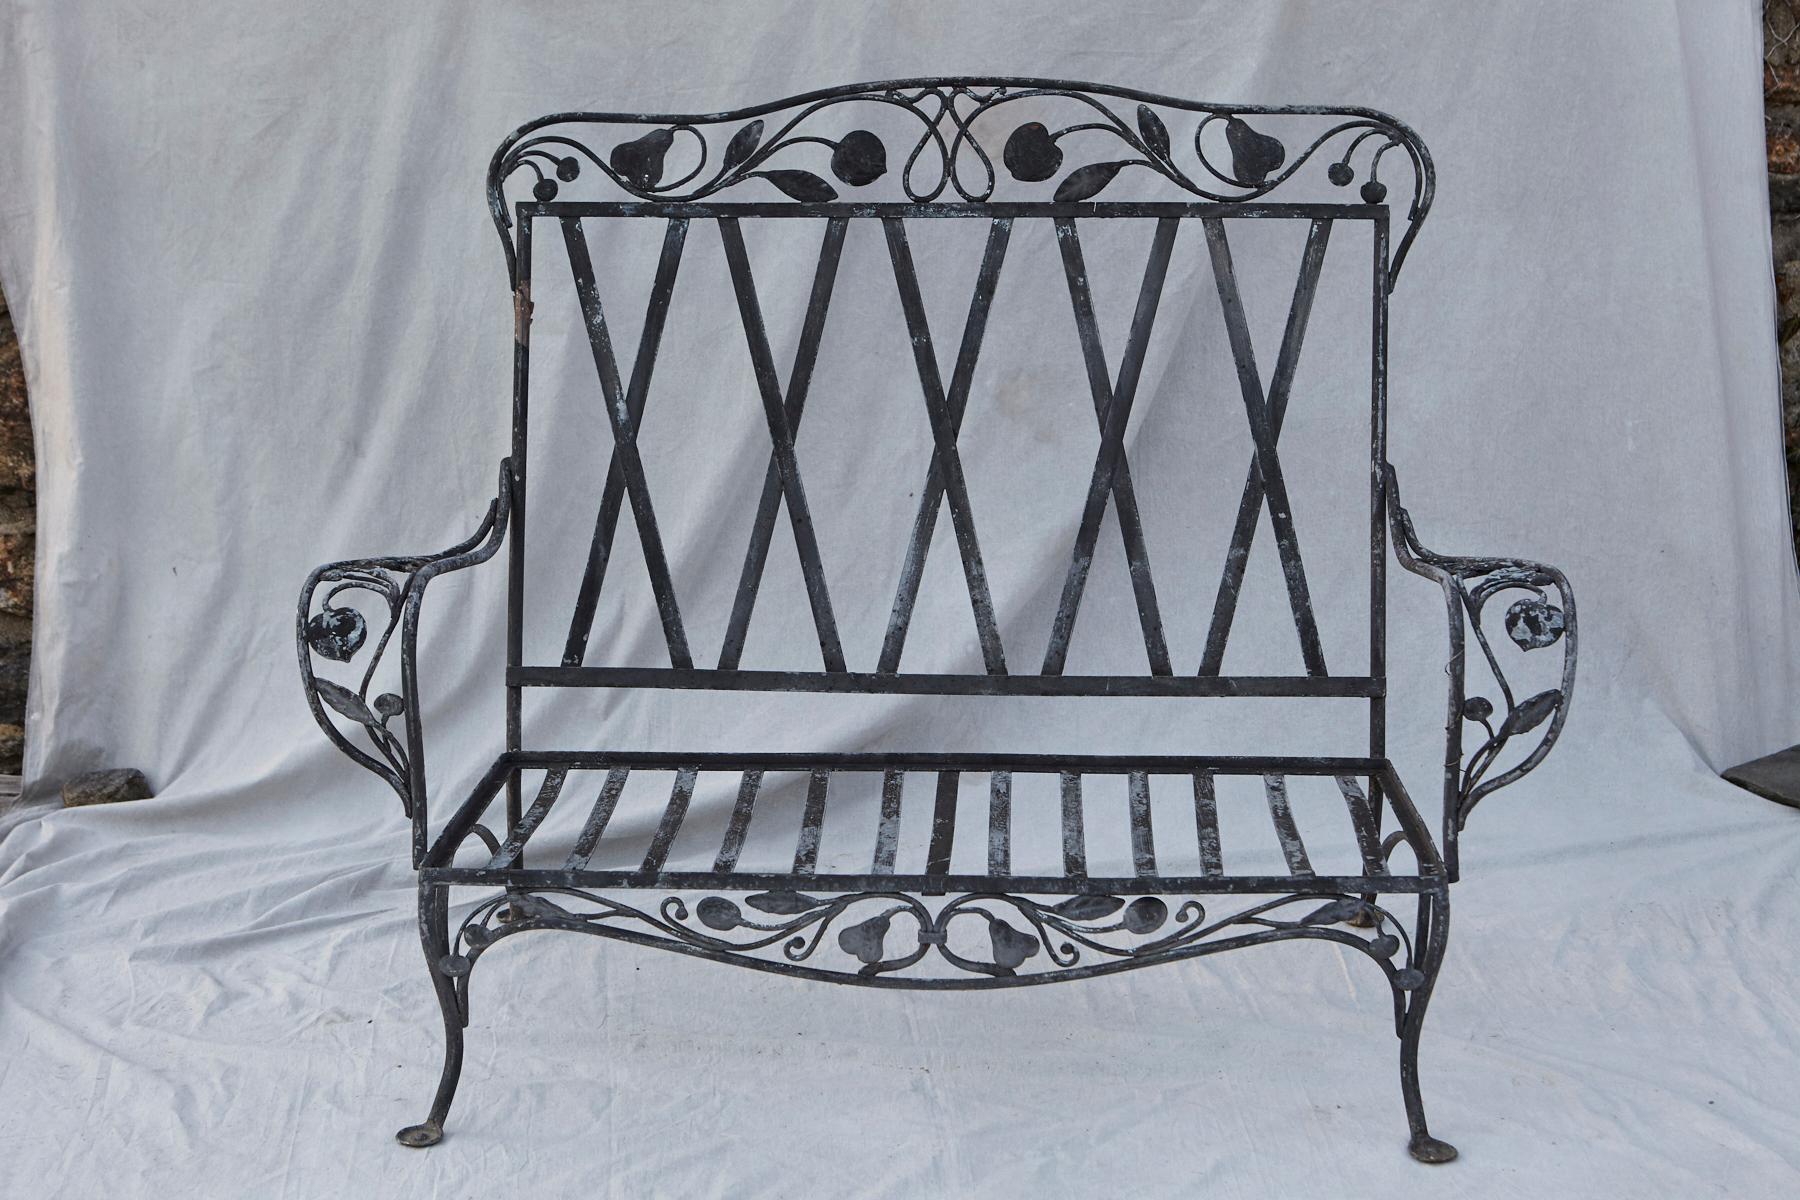 A rare Salterini elaborate wrought iron love seat from his Della Robbia collection / Group from the 1940s.
The loveseat is in a very good condition, solid and sturdy, part of the Neva-Rust outdoor product range of Salterin's garden furniture.
The